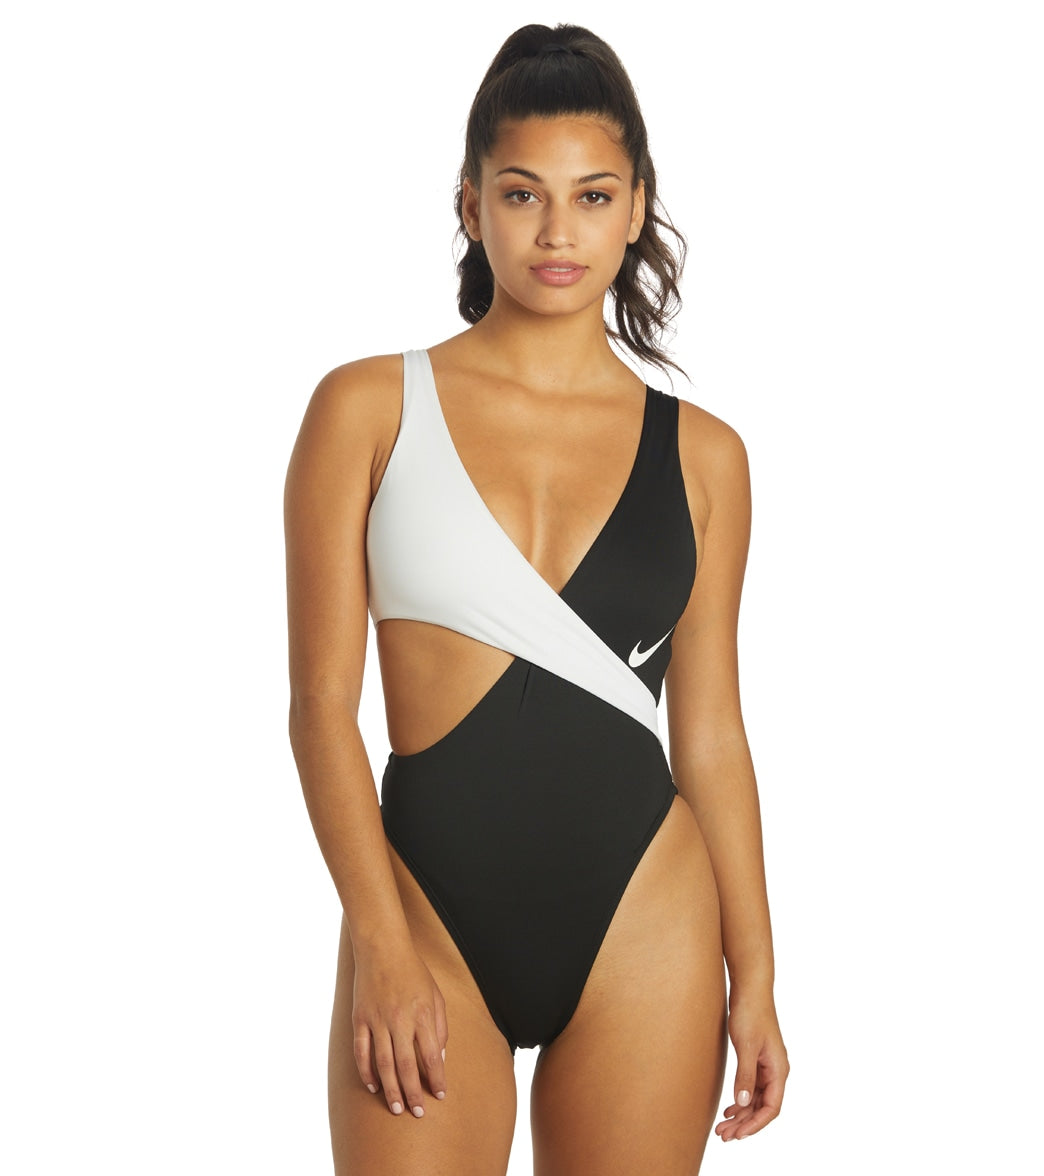 Nike Women's Colorblock Crossover One Piece Swimsuit at SwimOutlet.com